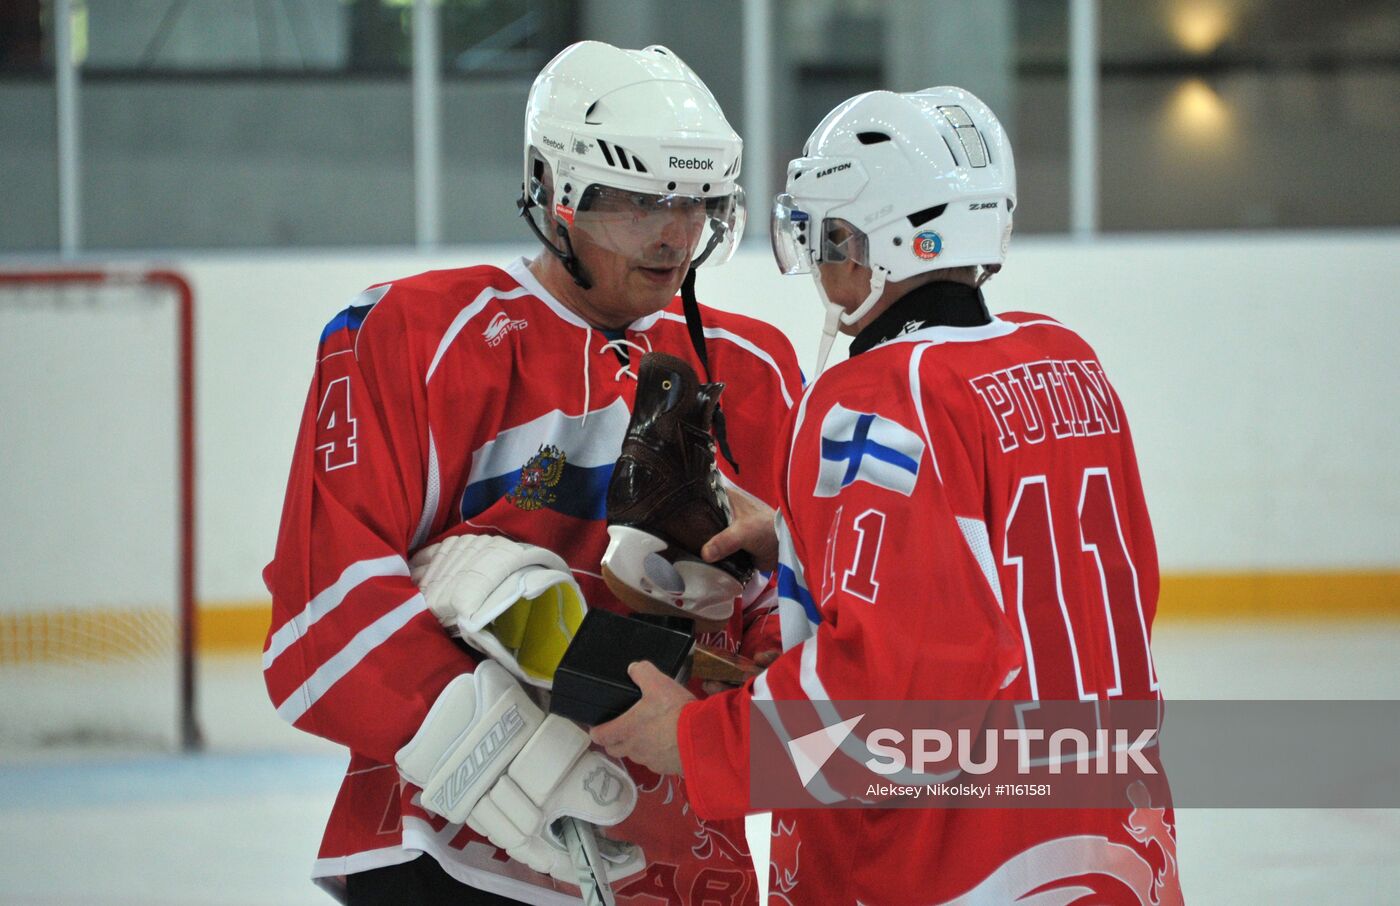 V. Putin and S.Niiniste take part in a friendly hockey match